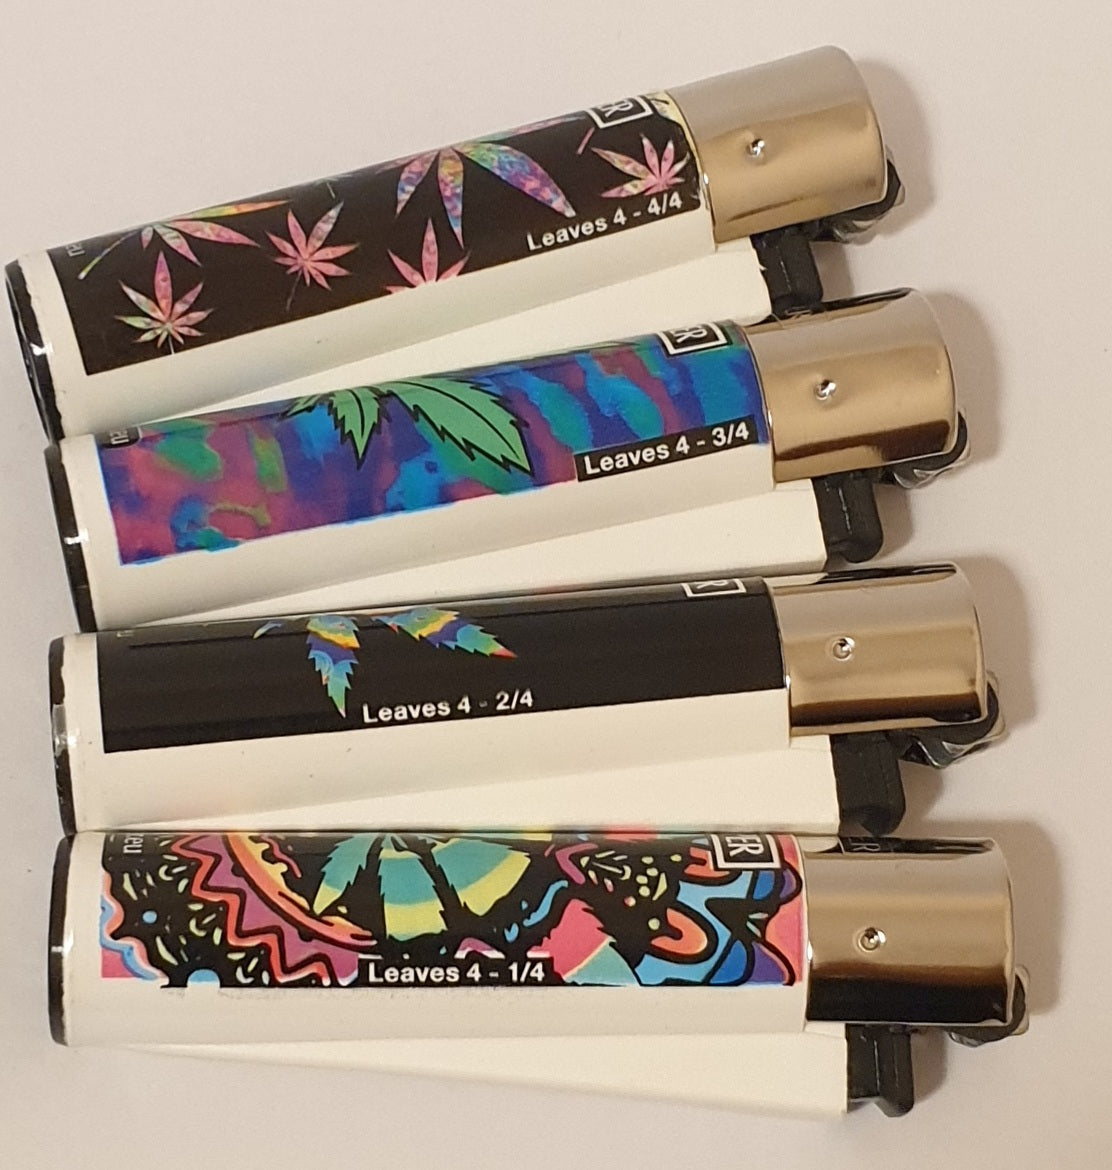 Clipper Lighters - Leaves 16 - Set of 4 Lighters - Refillable &  Re-flintable - Includes Display Case/Protective Holder - 99 Problems/420  Solutions